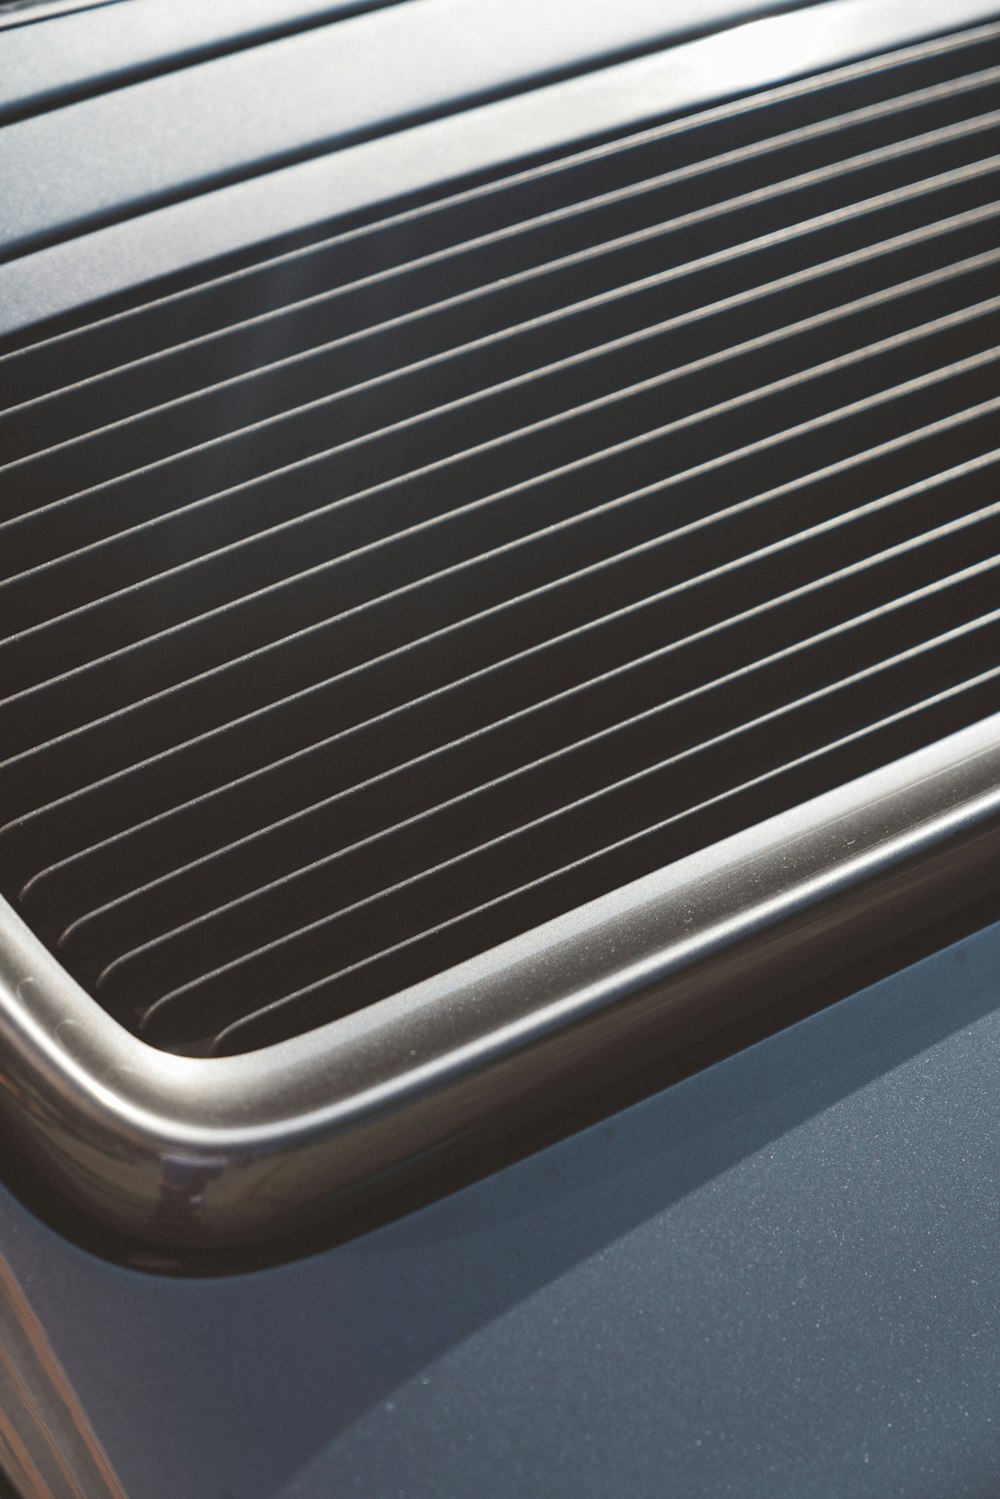 a close up of a metal grill on a car